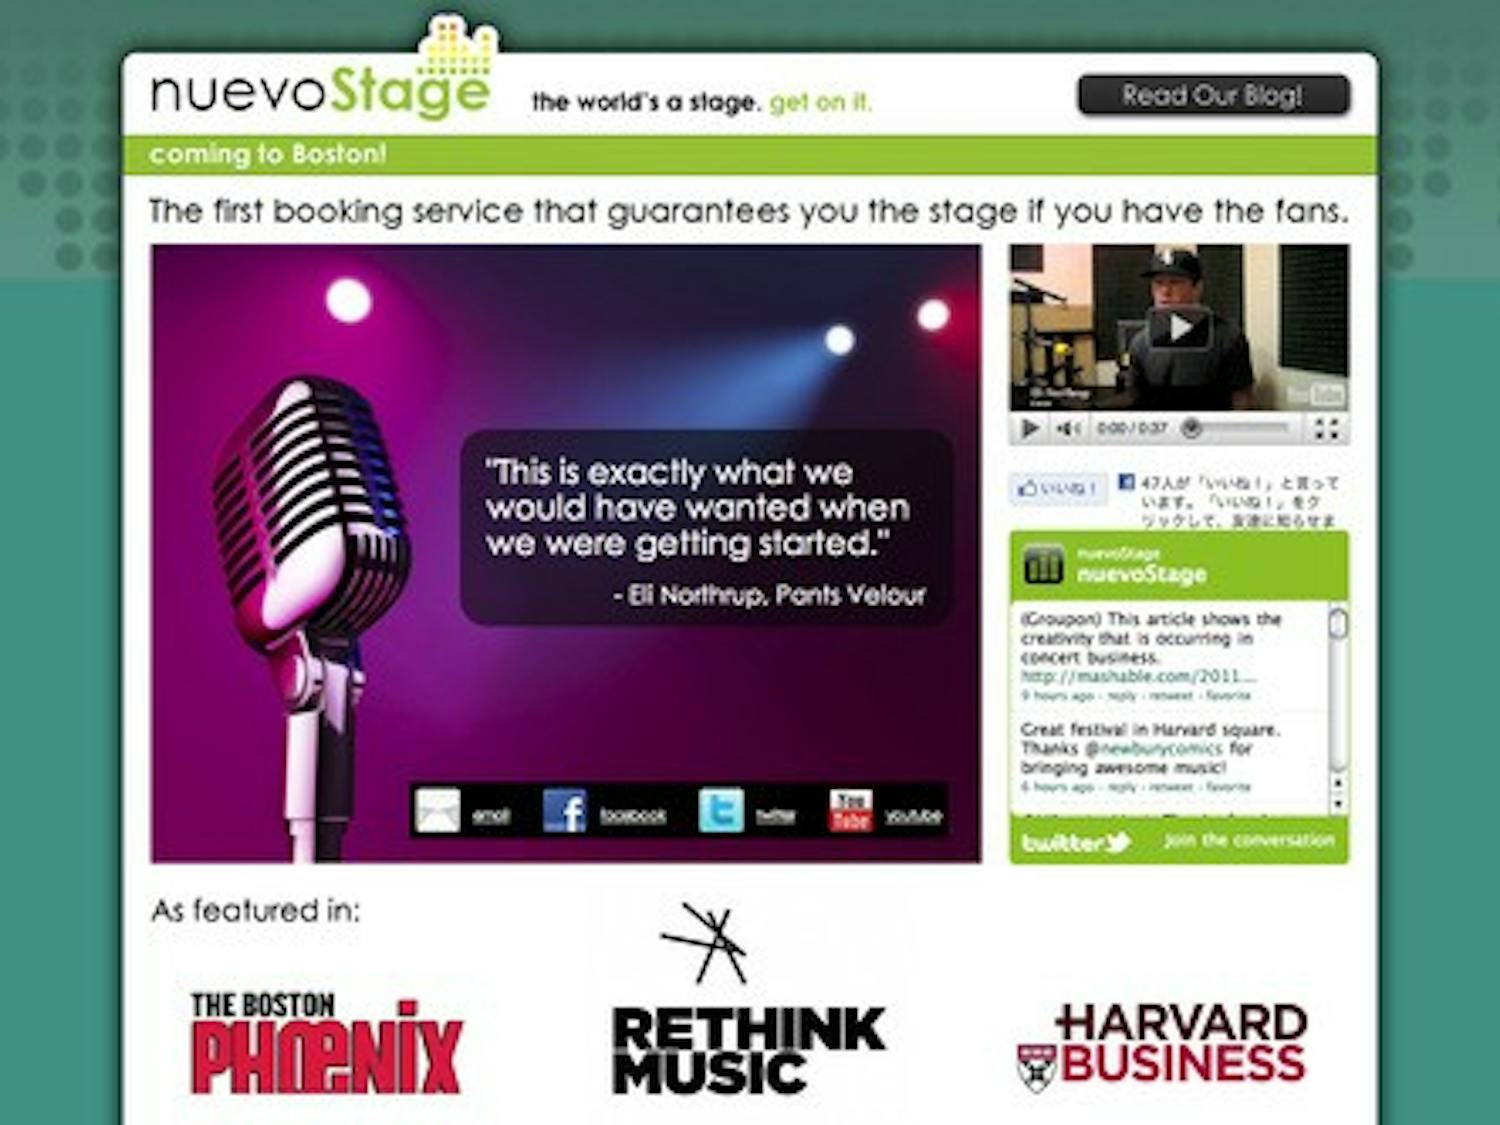 NuevoStage, which won $50,000 at the Rethink Music conference, will commence its operations by focusing on Boston music venues.